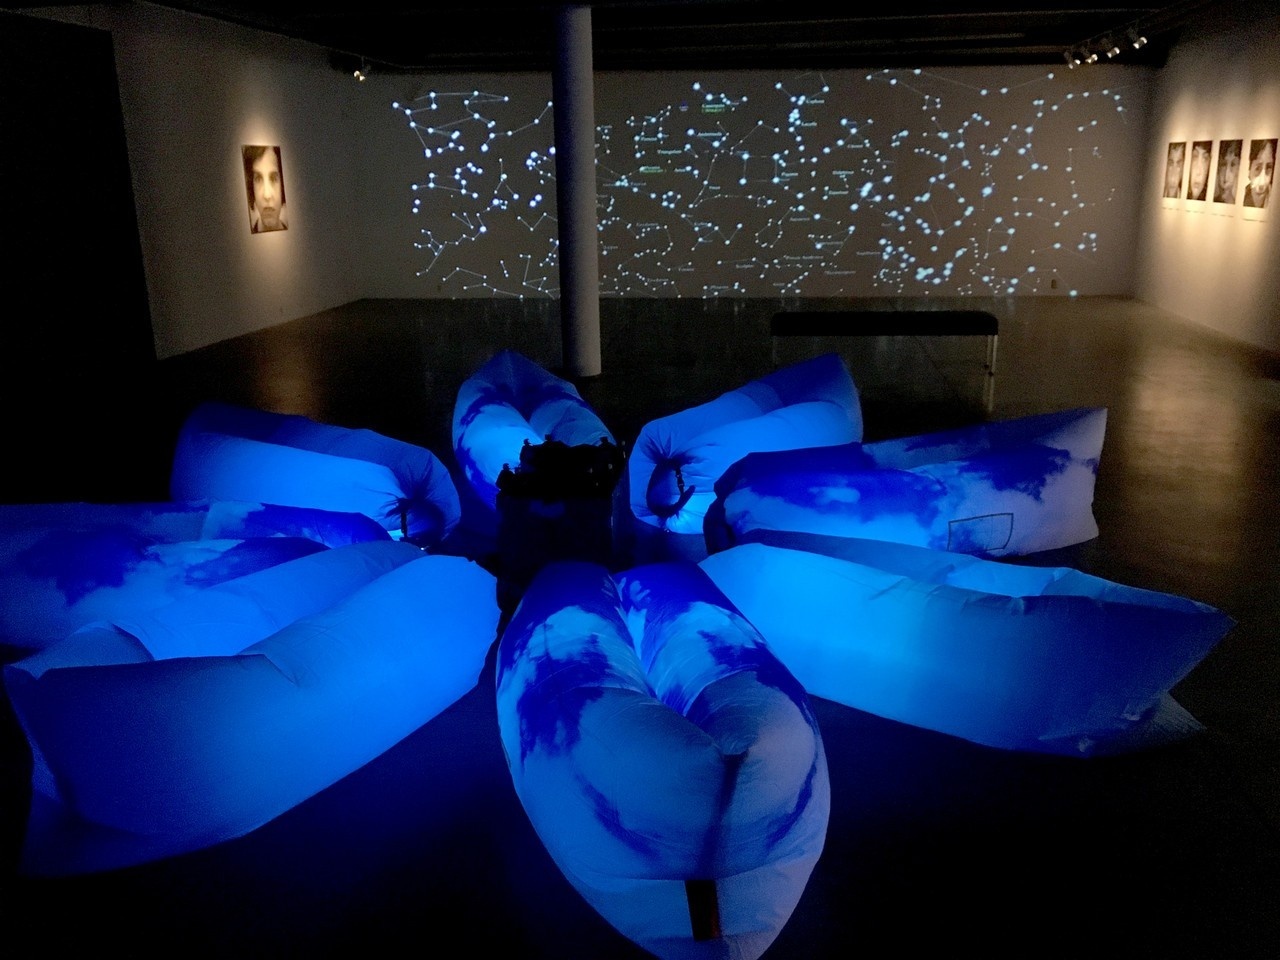   In the darkened central gallery, with a backdrop made of plastic gemstones and star projection, the installation features a lounging area with inflatable couches and equipped with motion sensors, speakers and LED lights.